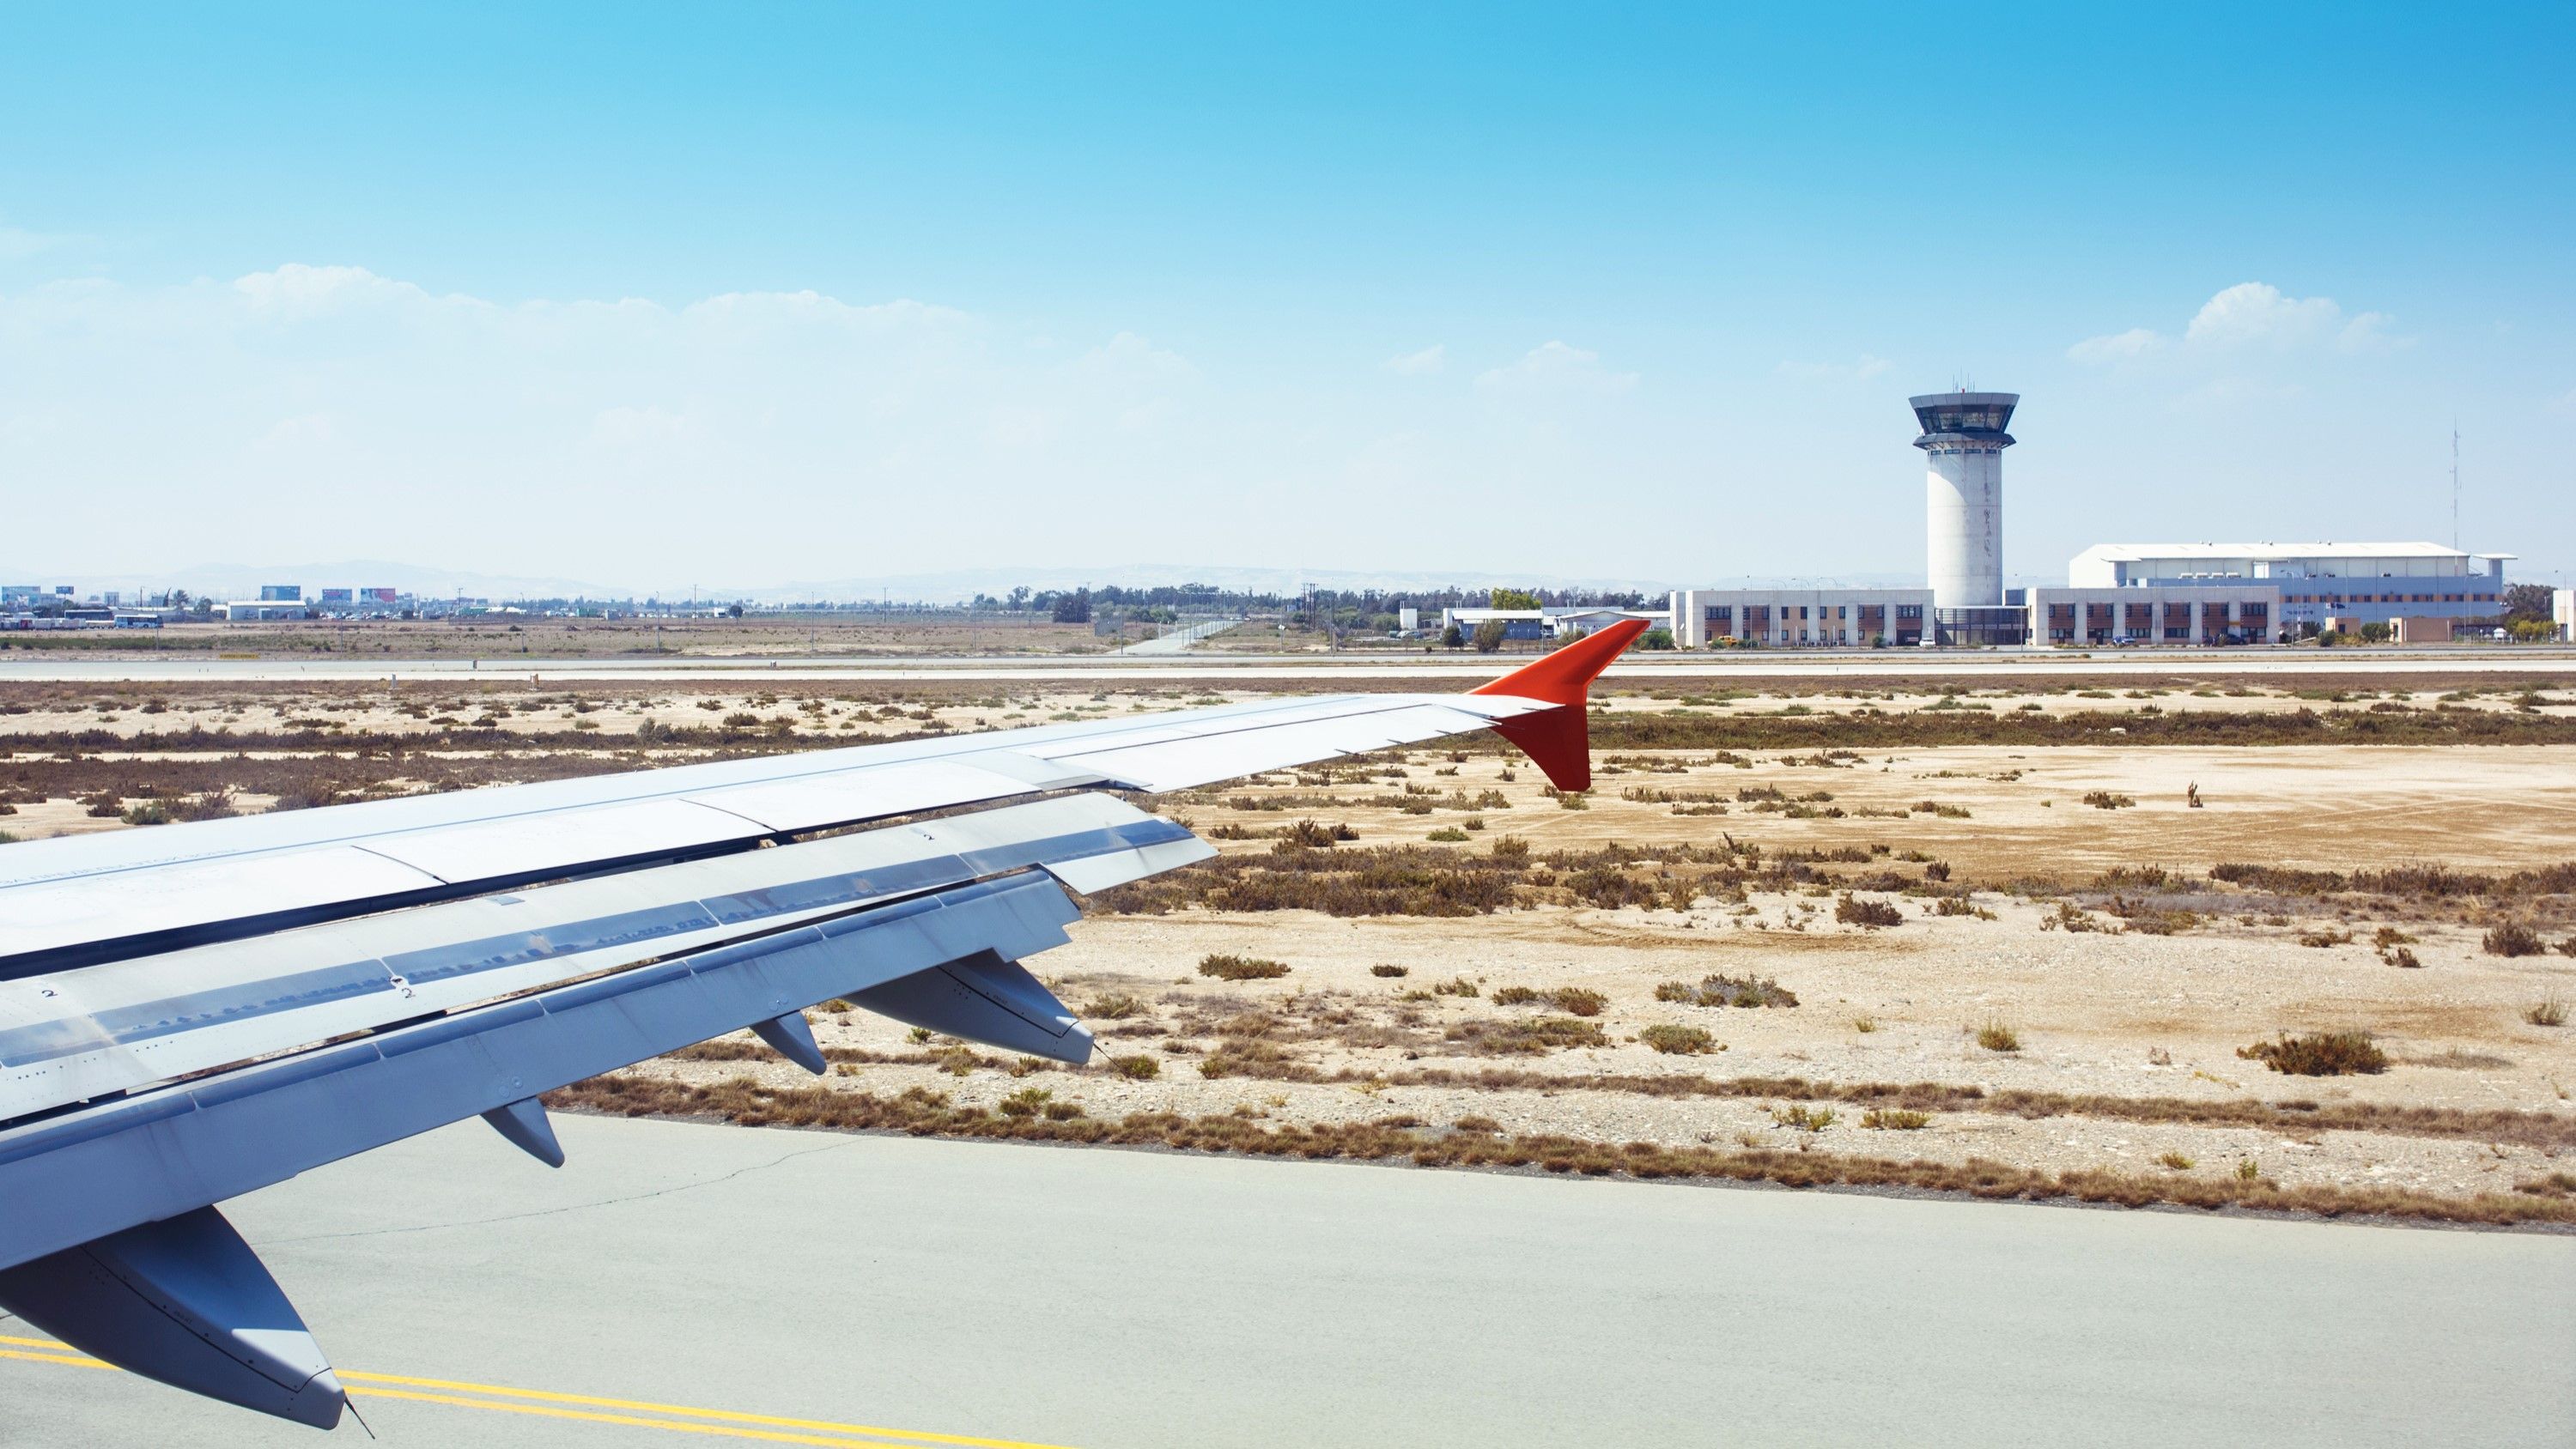 The Larnaca Airport ATC Tower as seen from the window of a commercial aircraft.